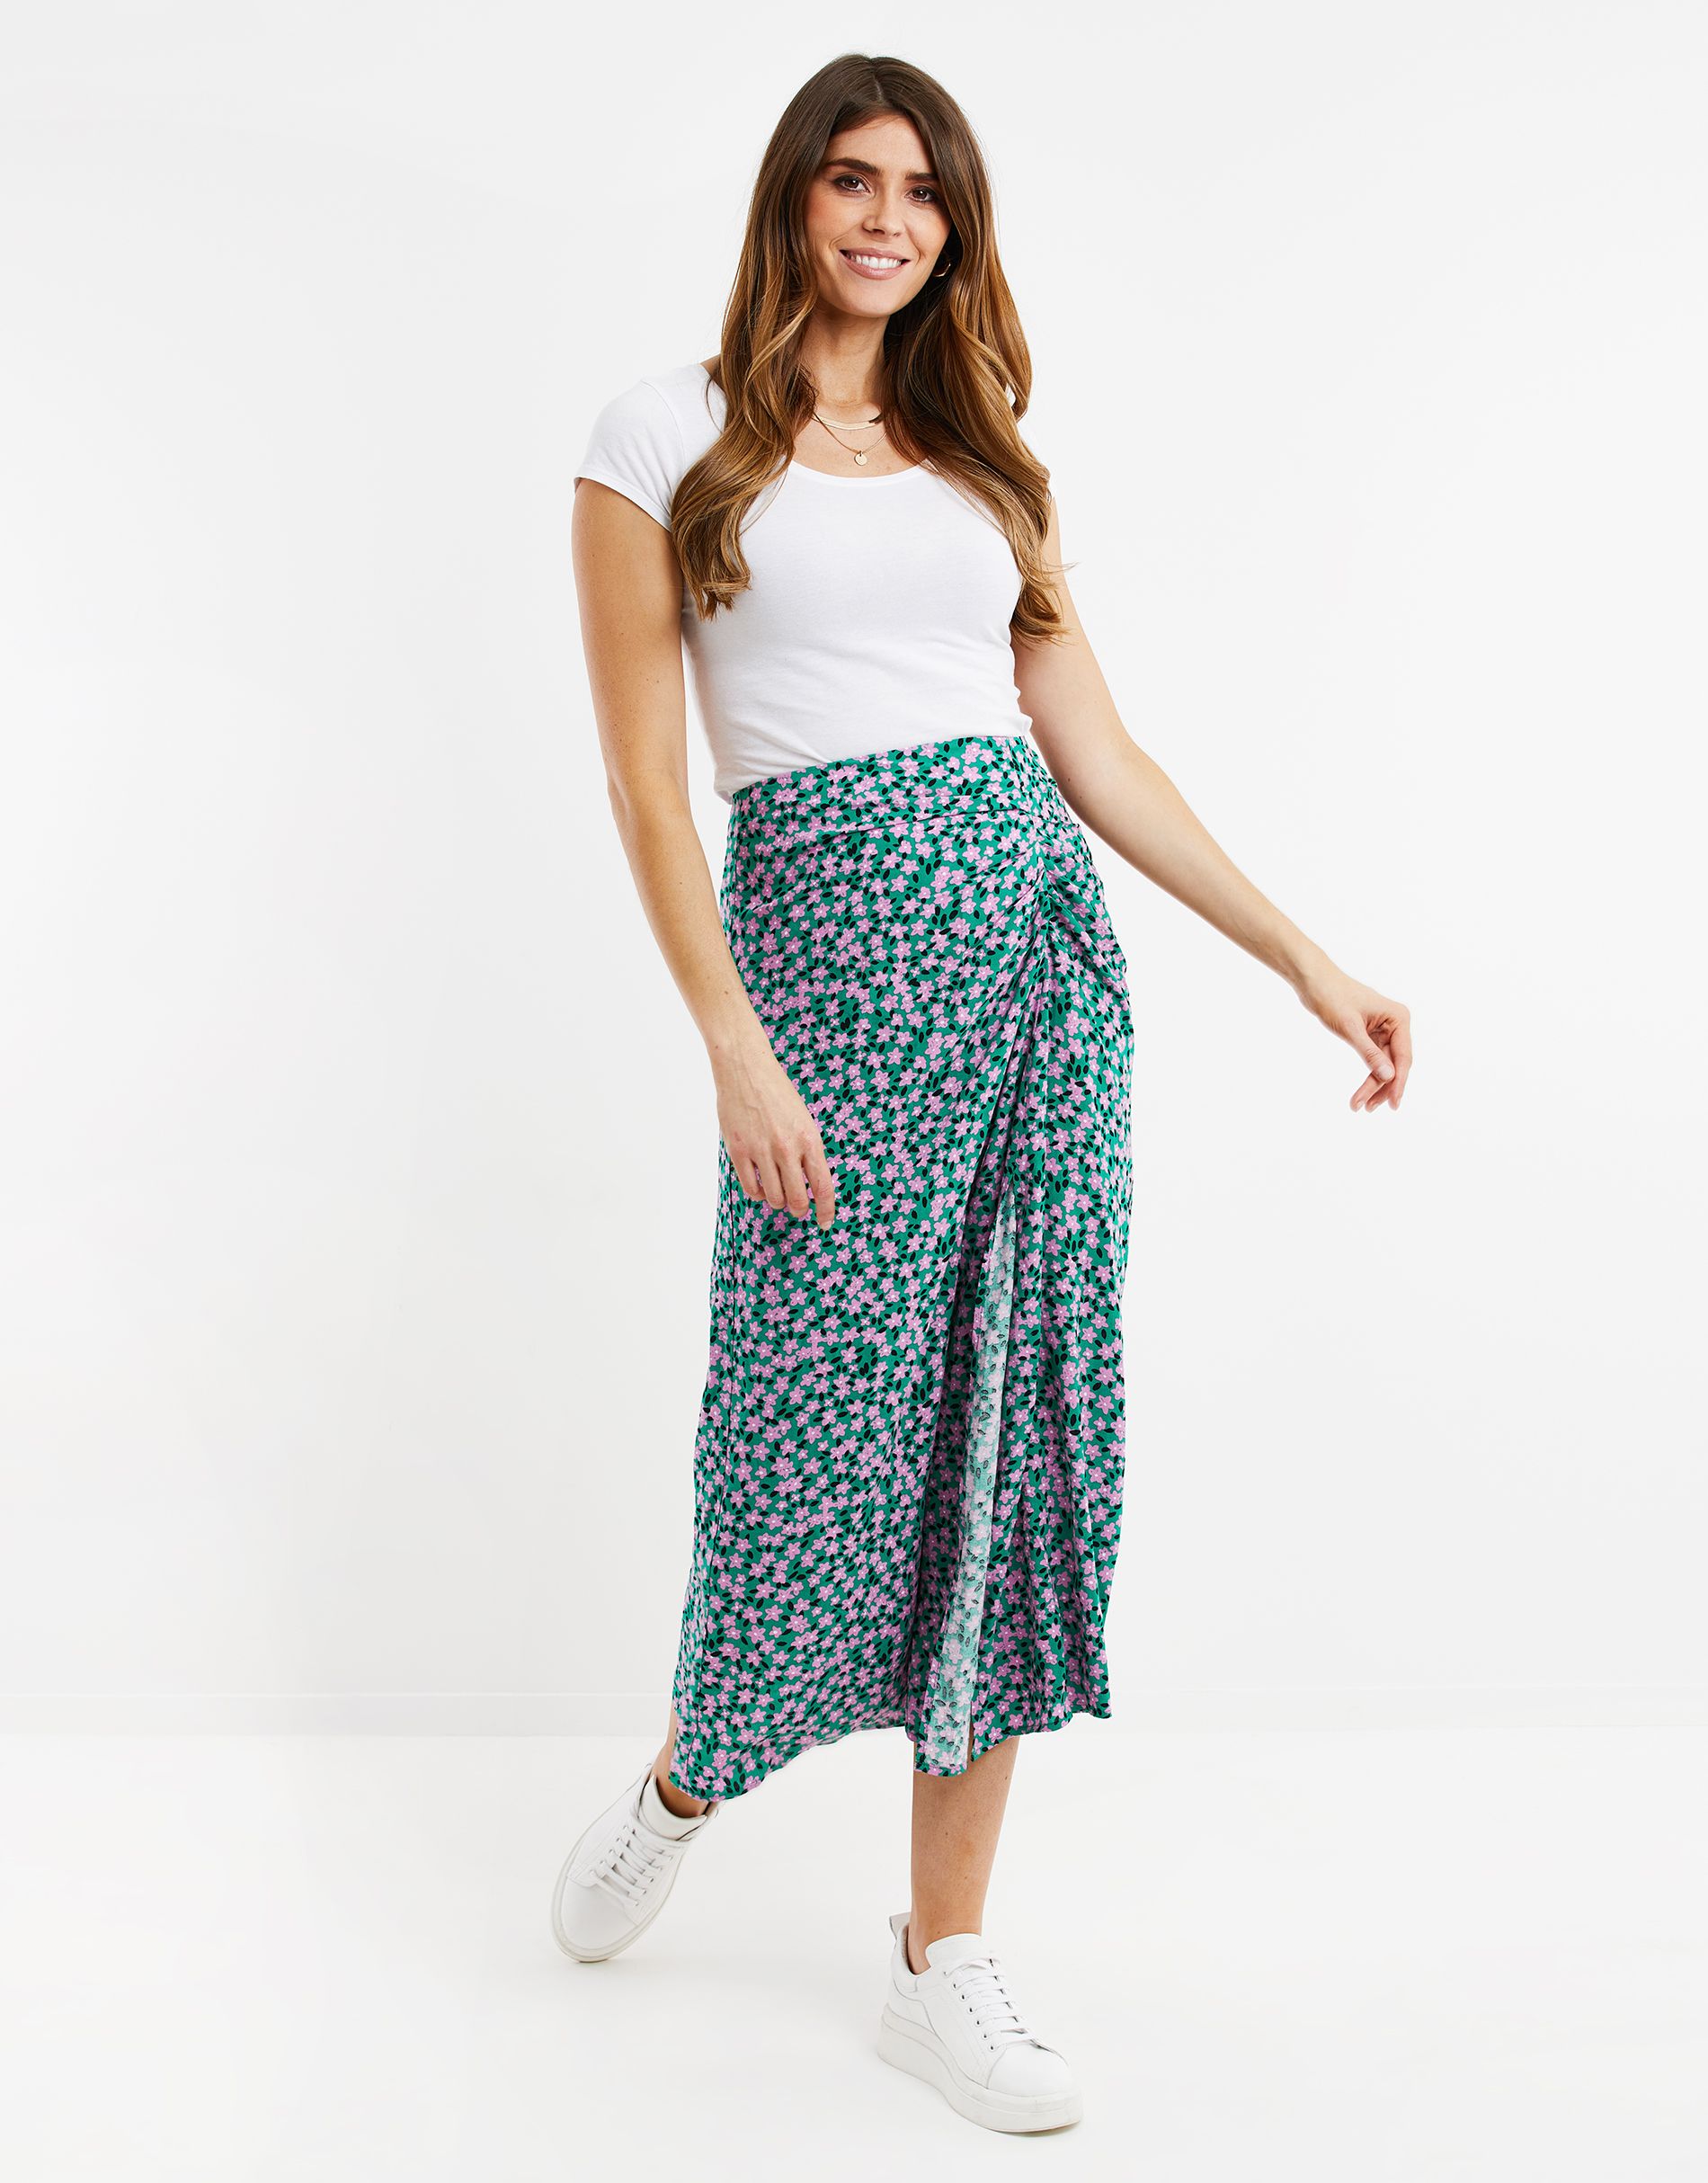 Elevate your spring/summer essentials with this ruched front midi skirt in a pretty green and pink floral print. With a concealed side zip fastening and split up the leg, this midi skirt hits the trends as well as being a versatile piece that you can experiement styling up or down.